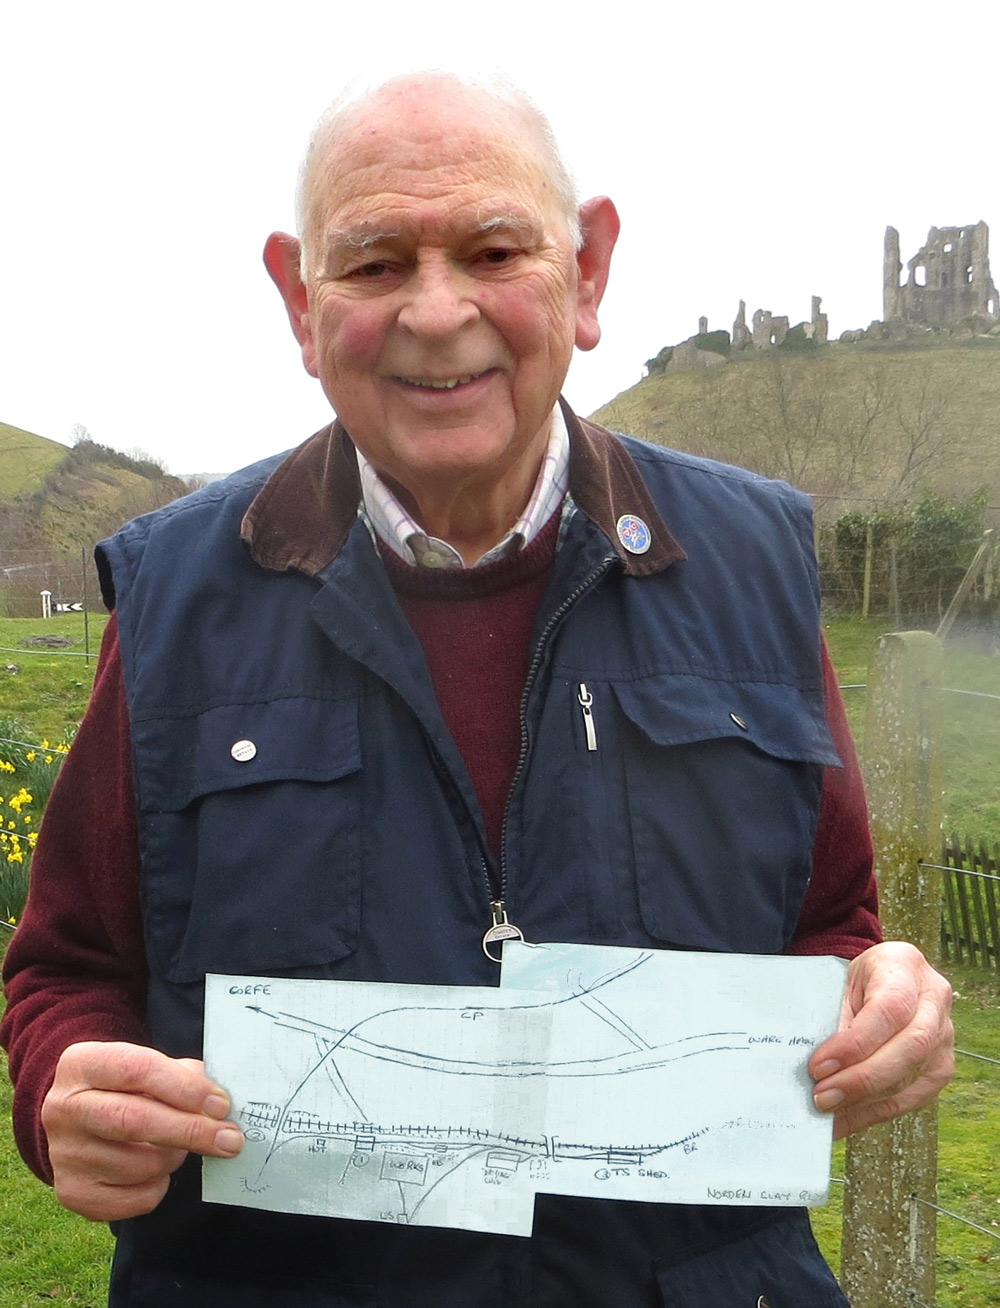 David Hyde from Binnegar is the latest volunteer to join the team at The Purbeck Mining Museum at Norden